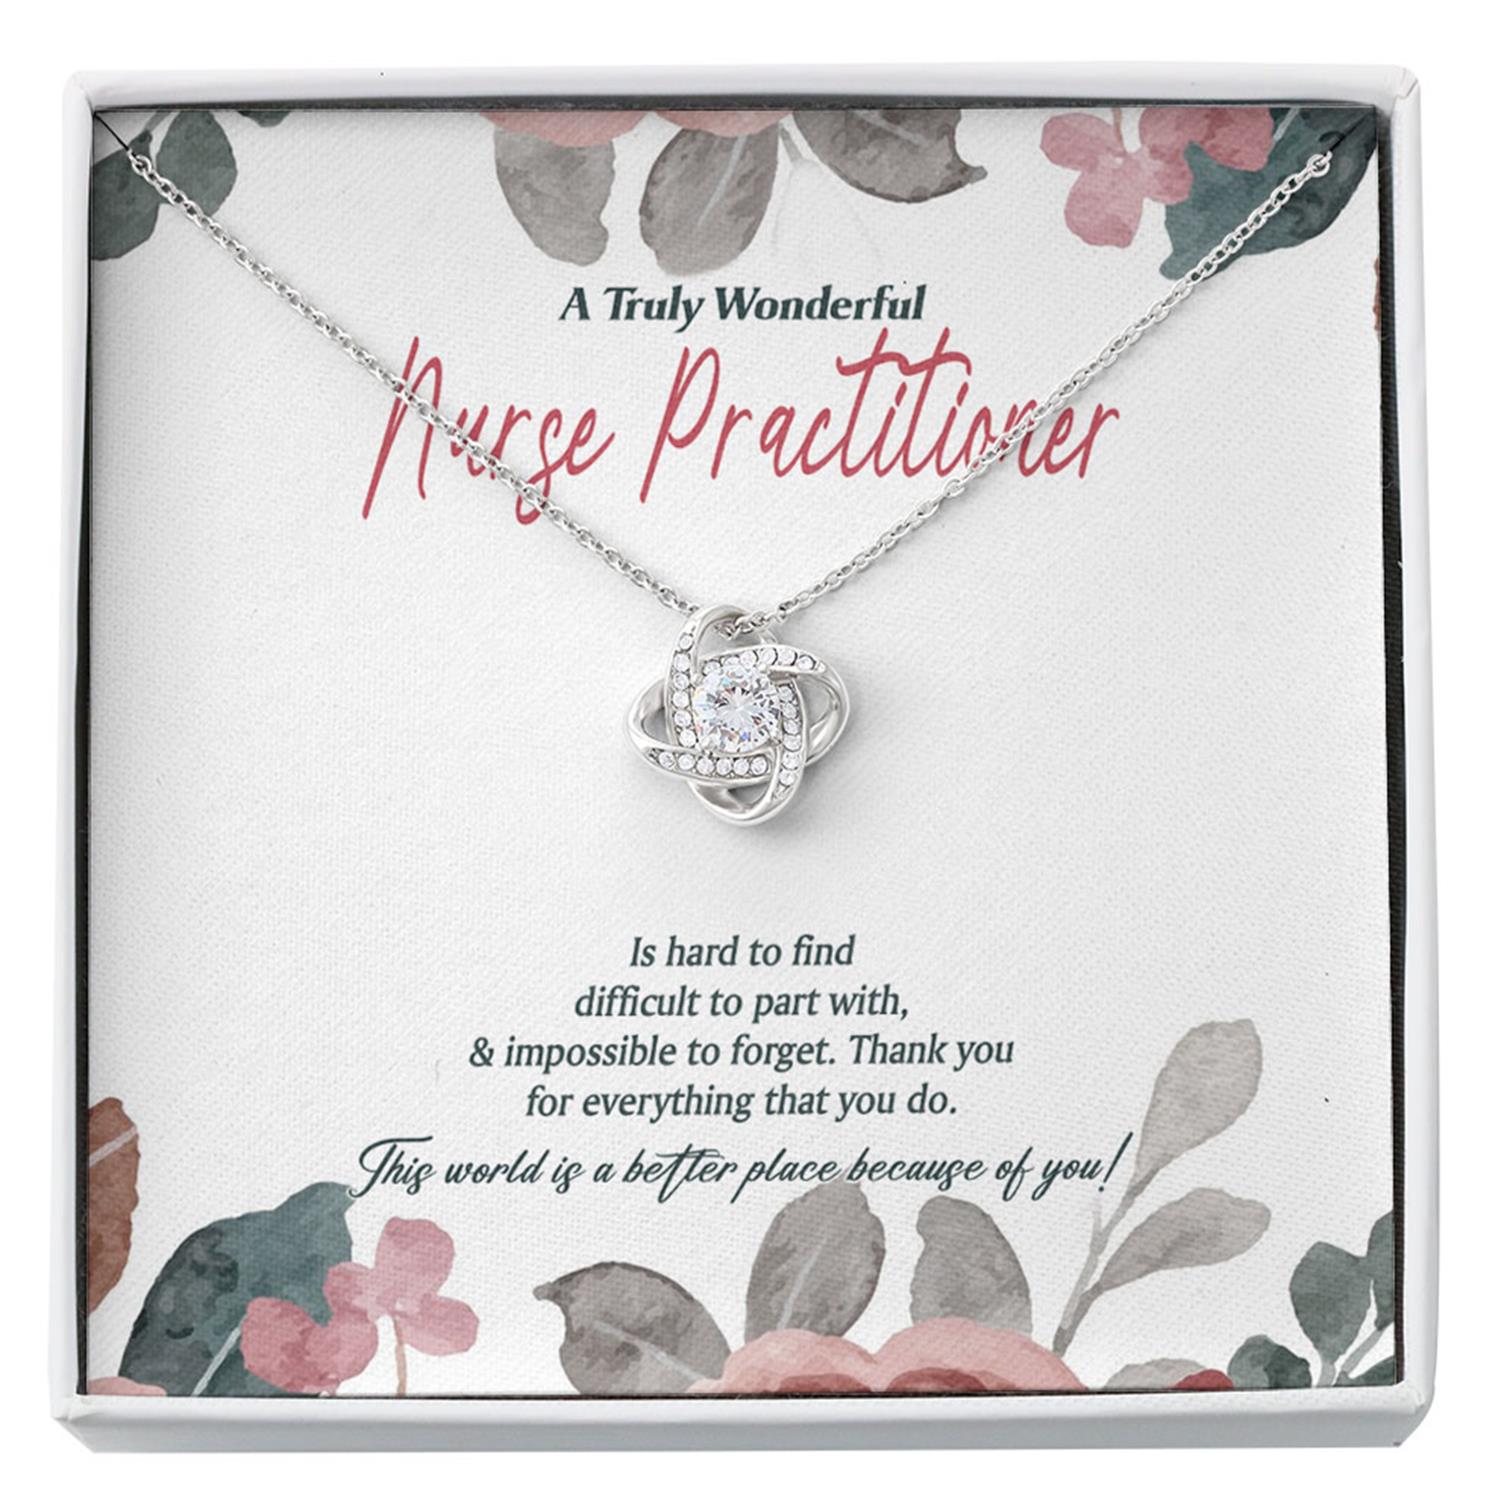 Nurse Practitioner Necklace Gifts For Women, Nurse Practitioner, Registered Nurse Custom Necklace